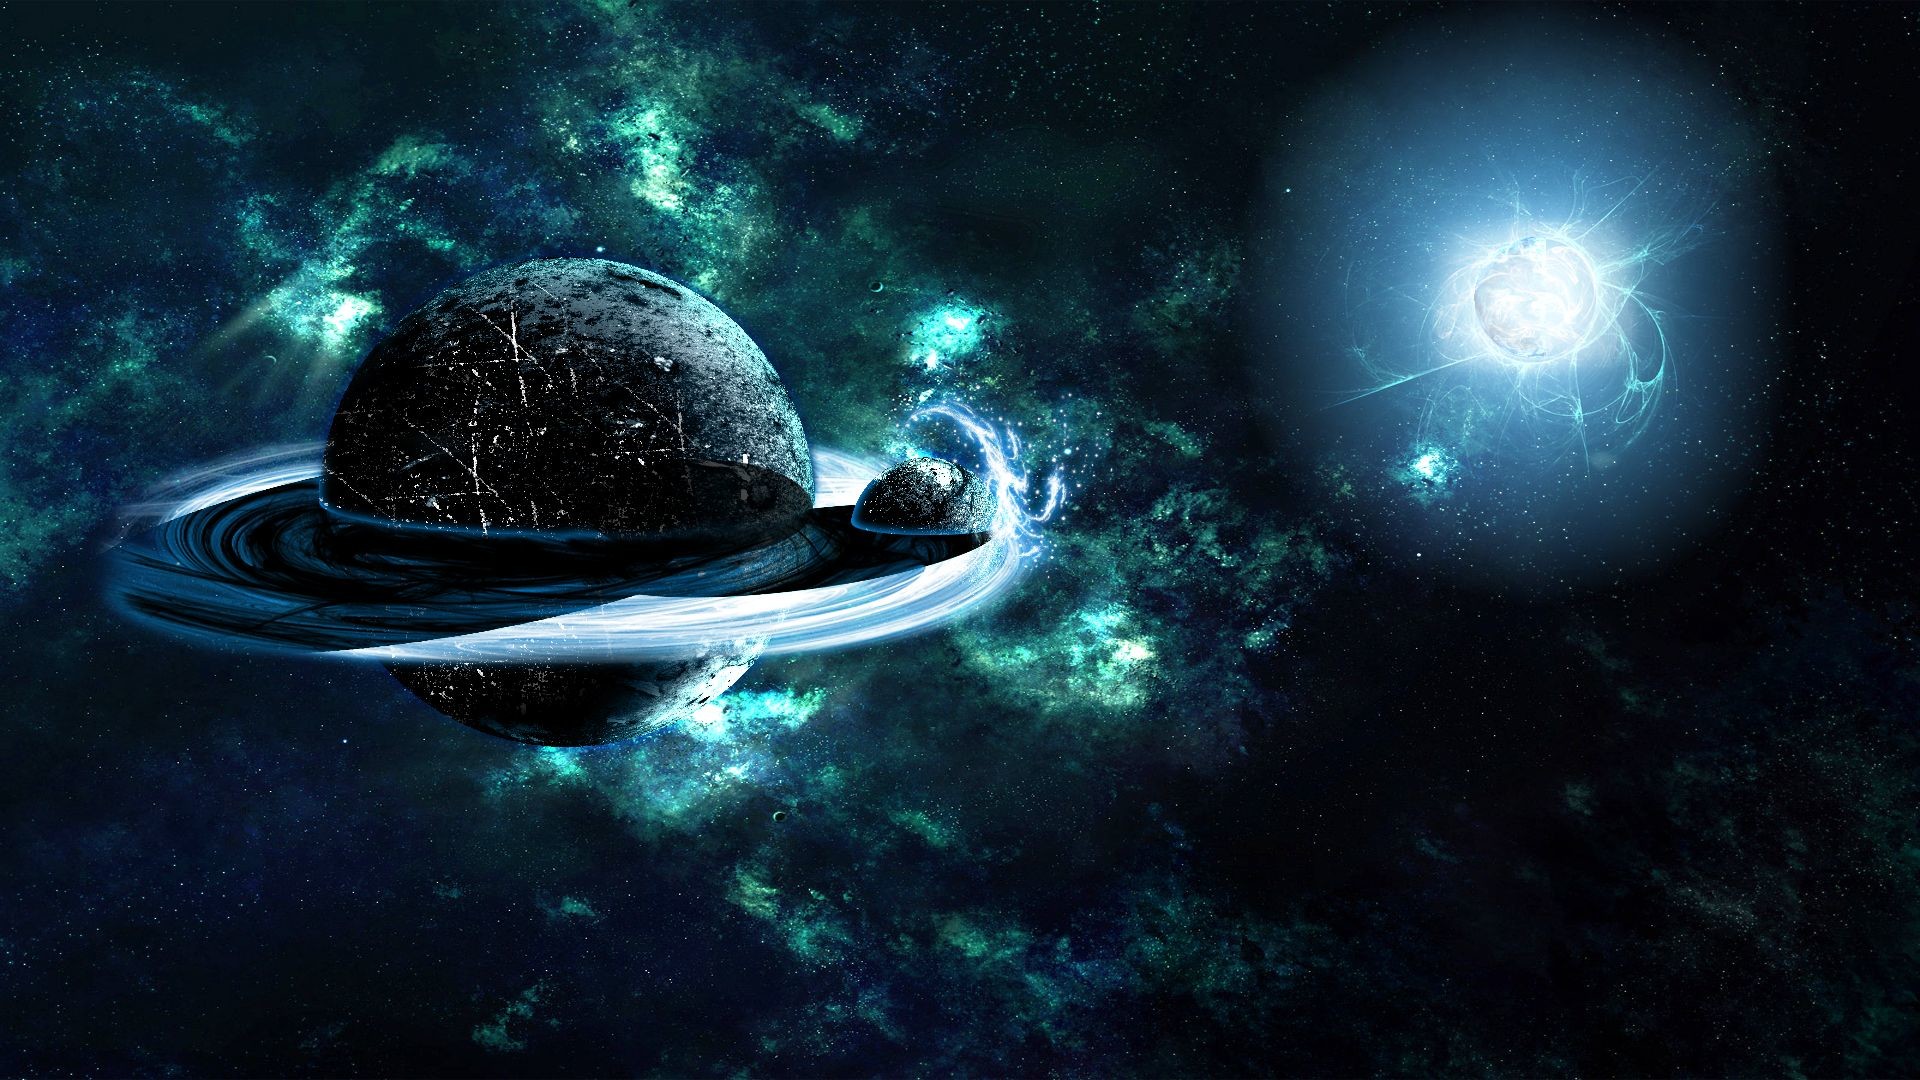 Outer Space Full HD Quality Wallpapers, Widescreen Wallpapers Pictures Of Space Wallpapers Wallpapers